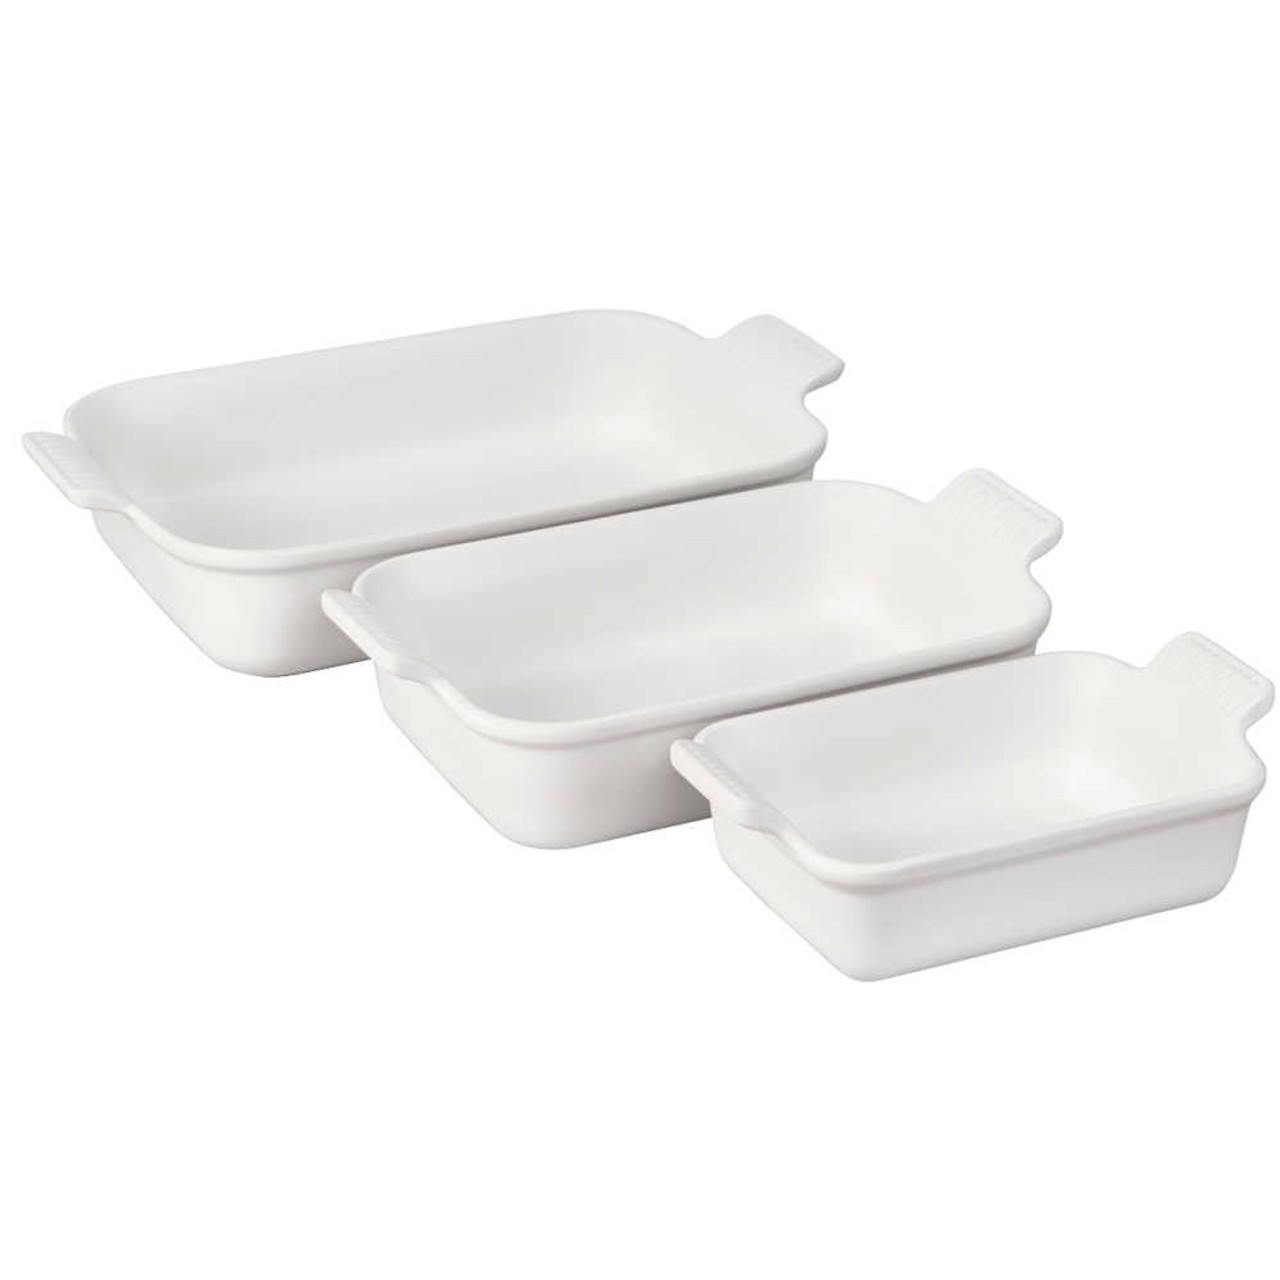 https://cdn11.bigcommerce.com/s-hccytny0od/images/stencil/1280x1280/products/5346/23228/Le_Creuset_Heritage_3-Piece_Rectangular_Baking_Dish_Set_in_White__70302.1680112472.jpg?c=2?imbypass=on